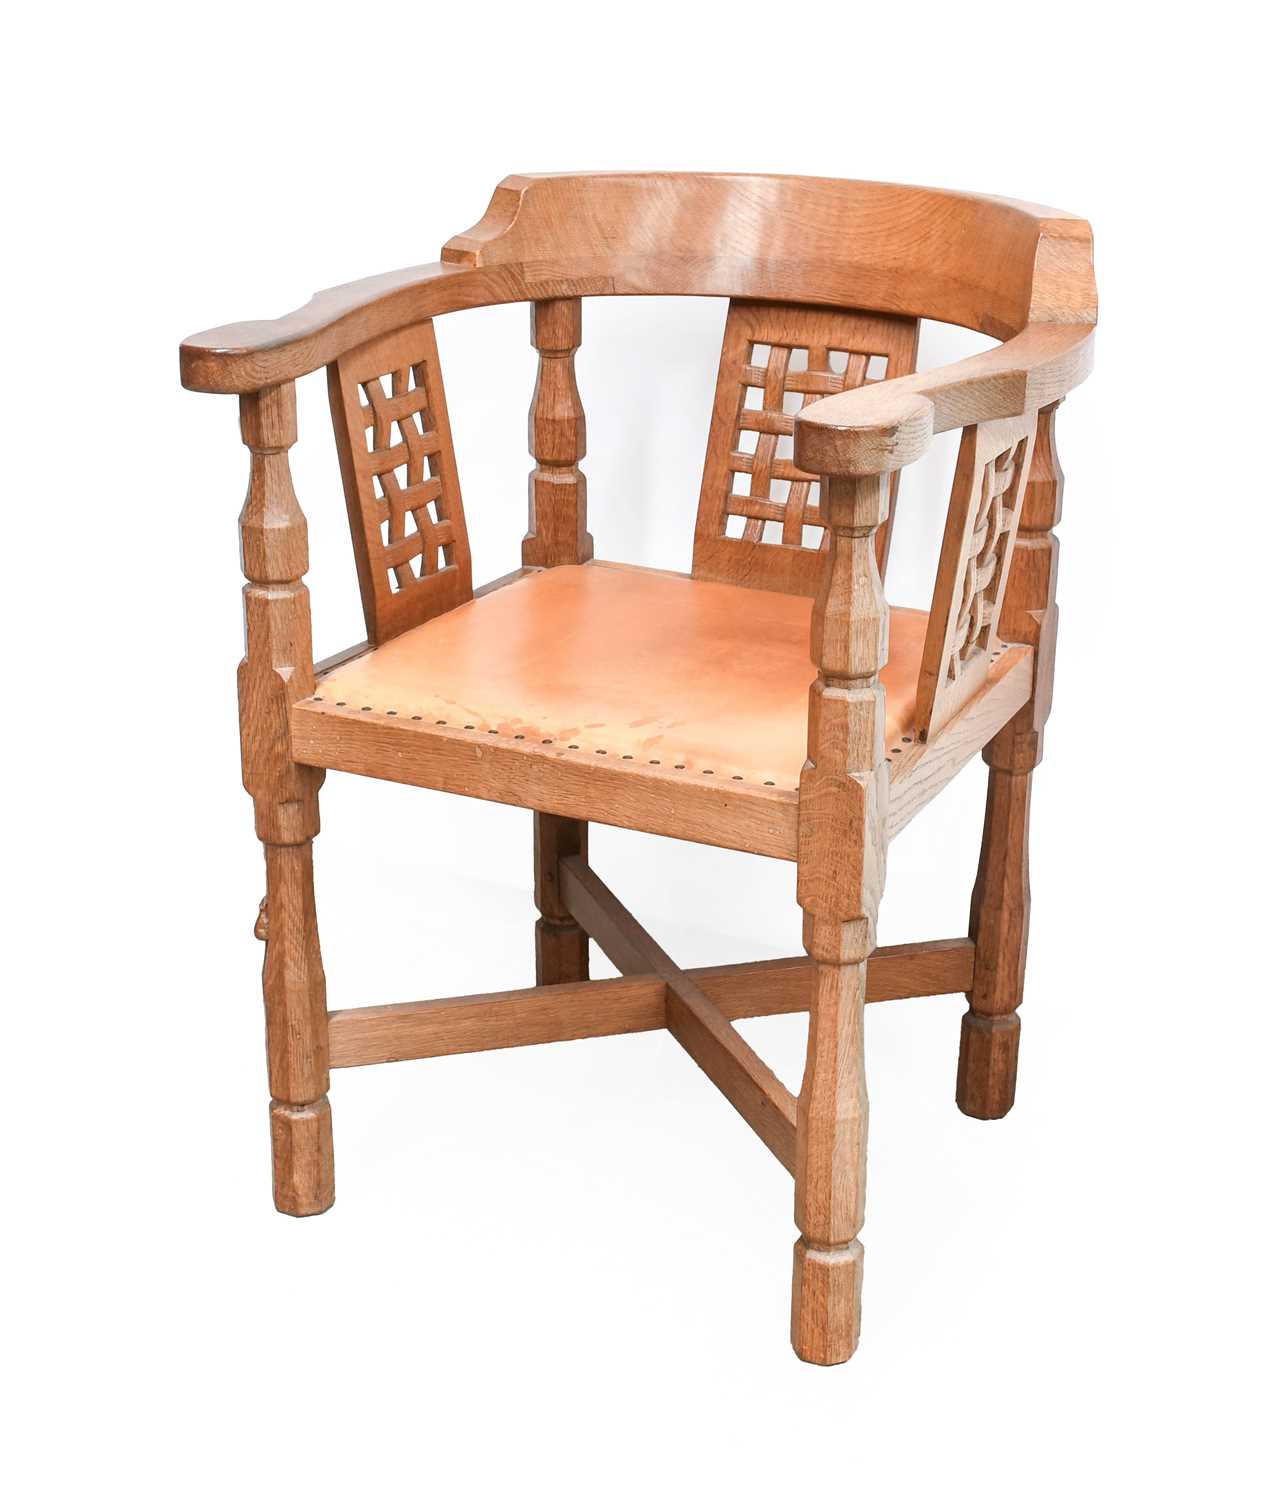 Workshop of Robert Mouseman Thompson (Kilburn): An English Oak Monk's Chair, with curved back and - Image 2 of 2